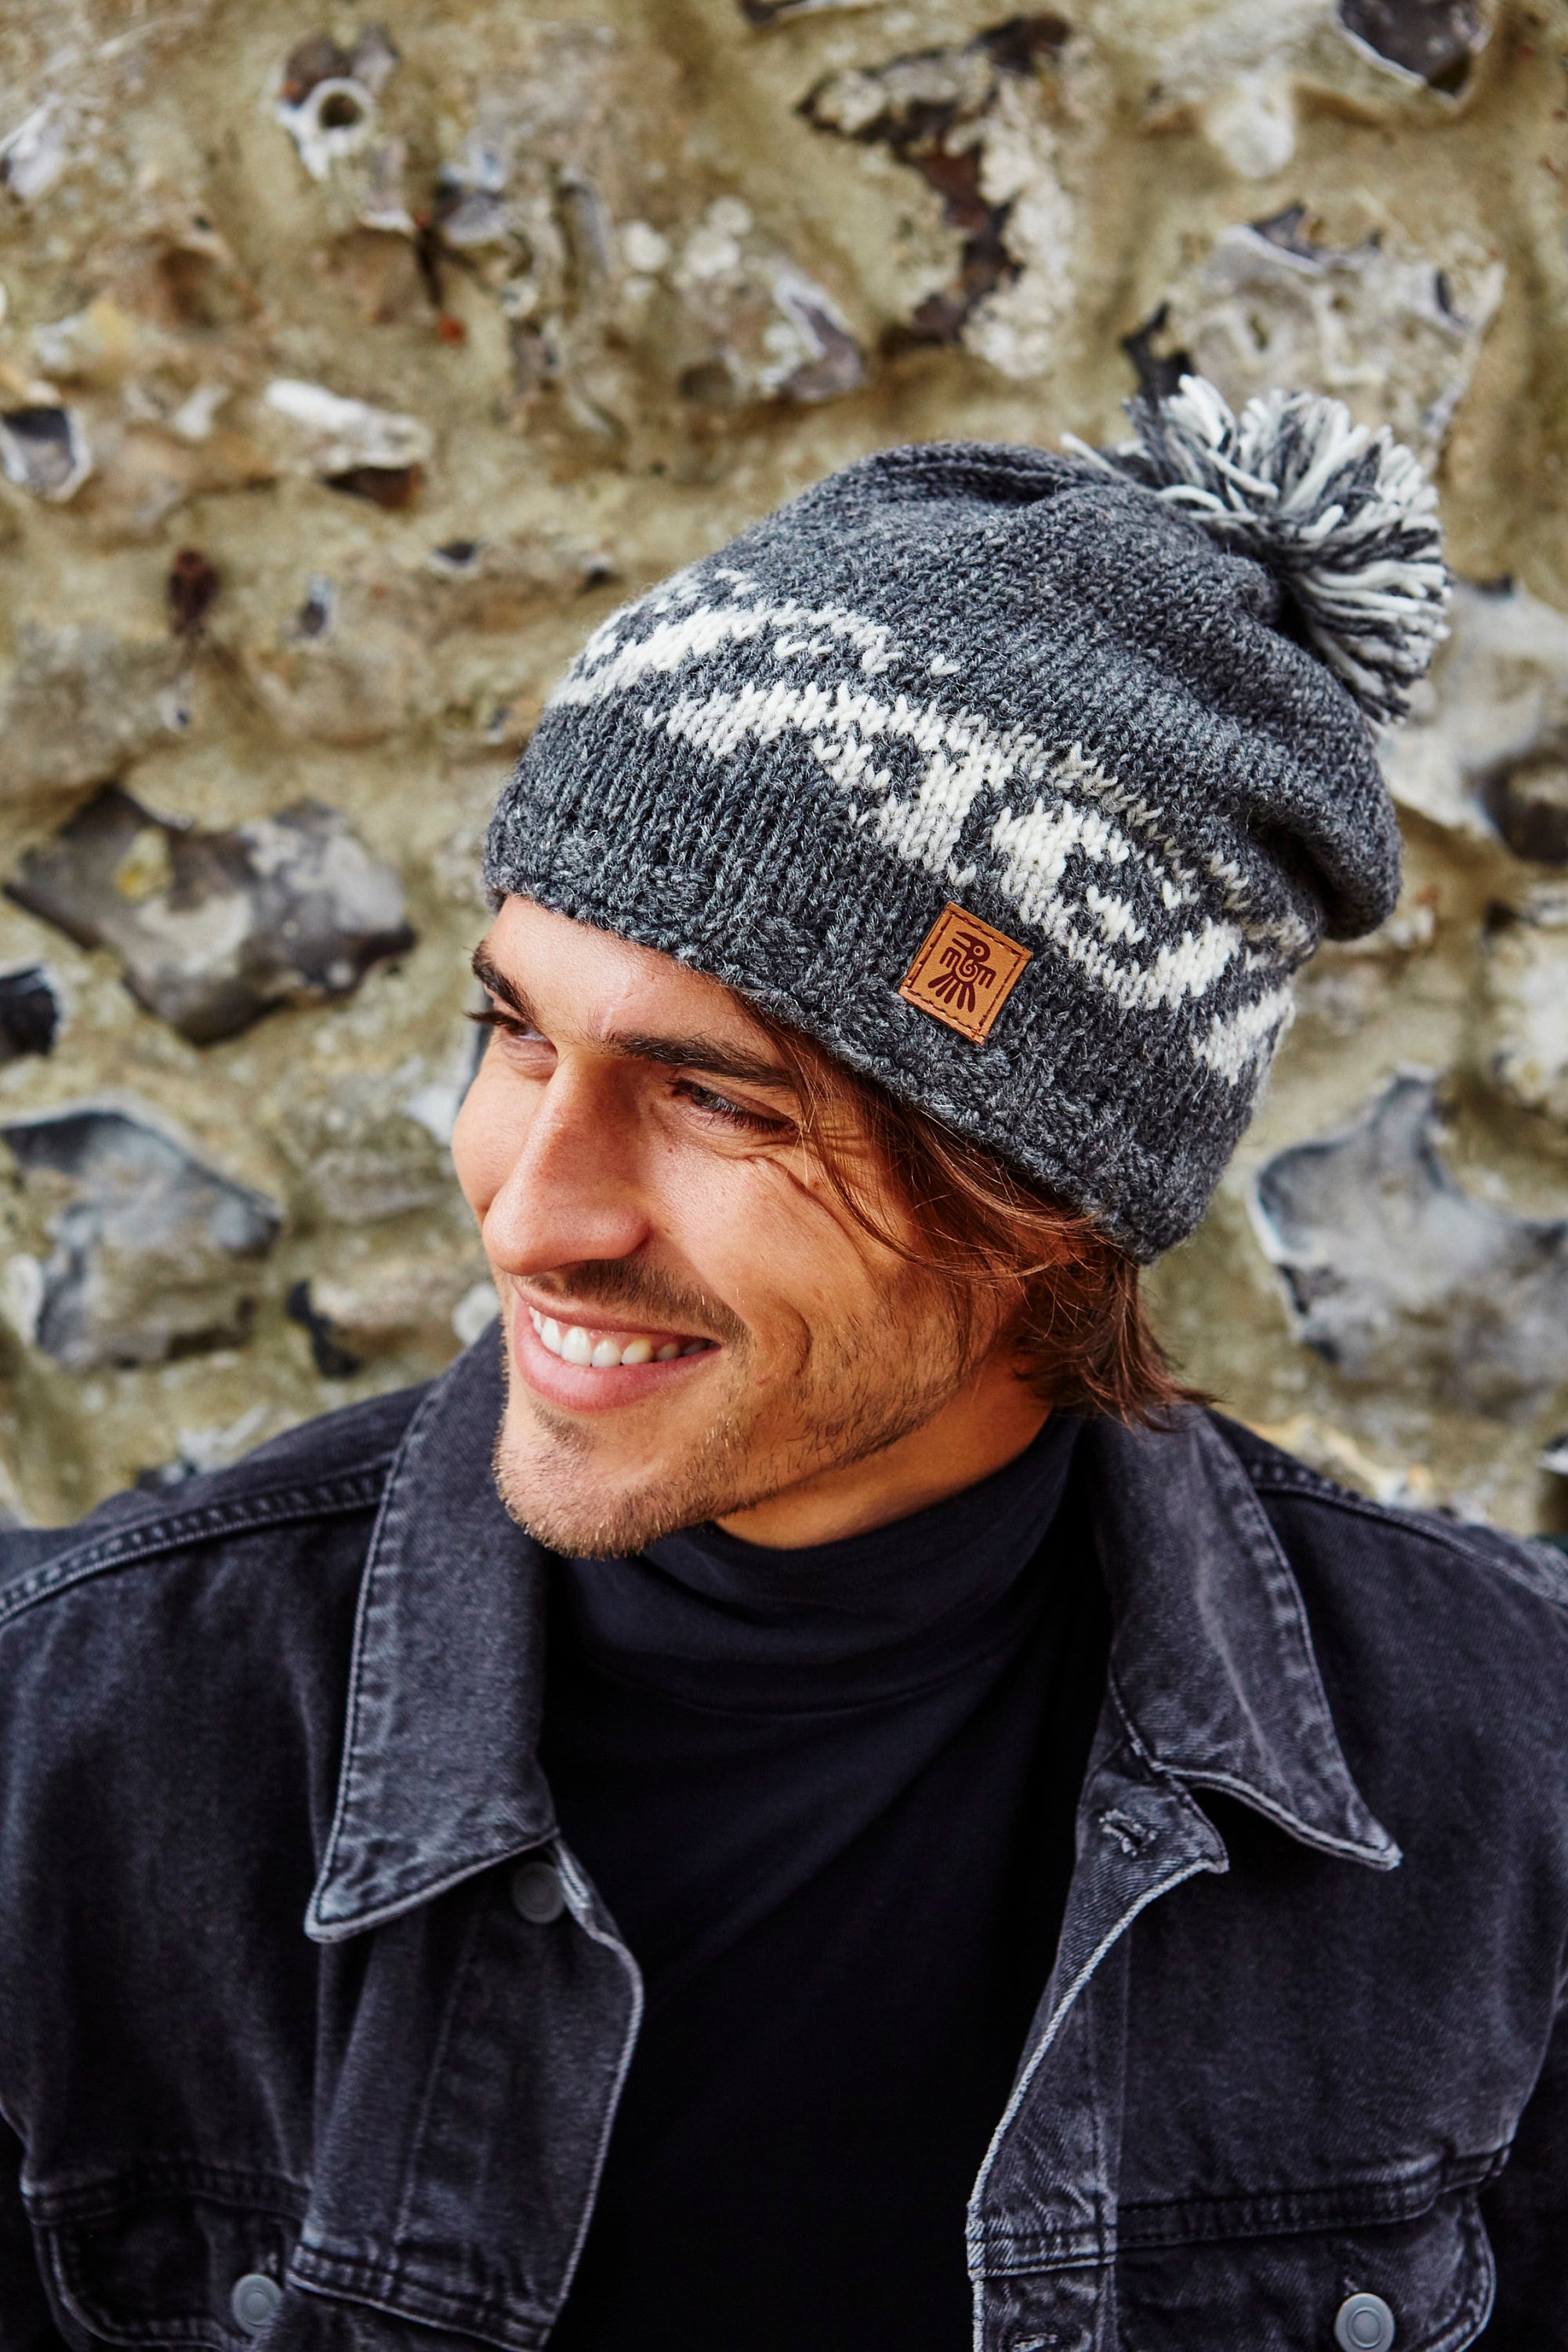 Fair Handmade Wool Knit Men\'s Beanie Bobble Beanie 100% Pachamama Etsy Knitted Sustainable Nepal in Clothing - Surf Wave Hat Trade